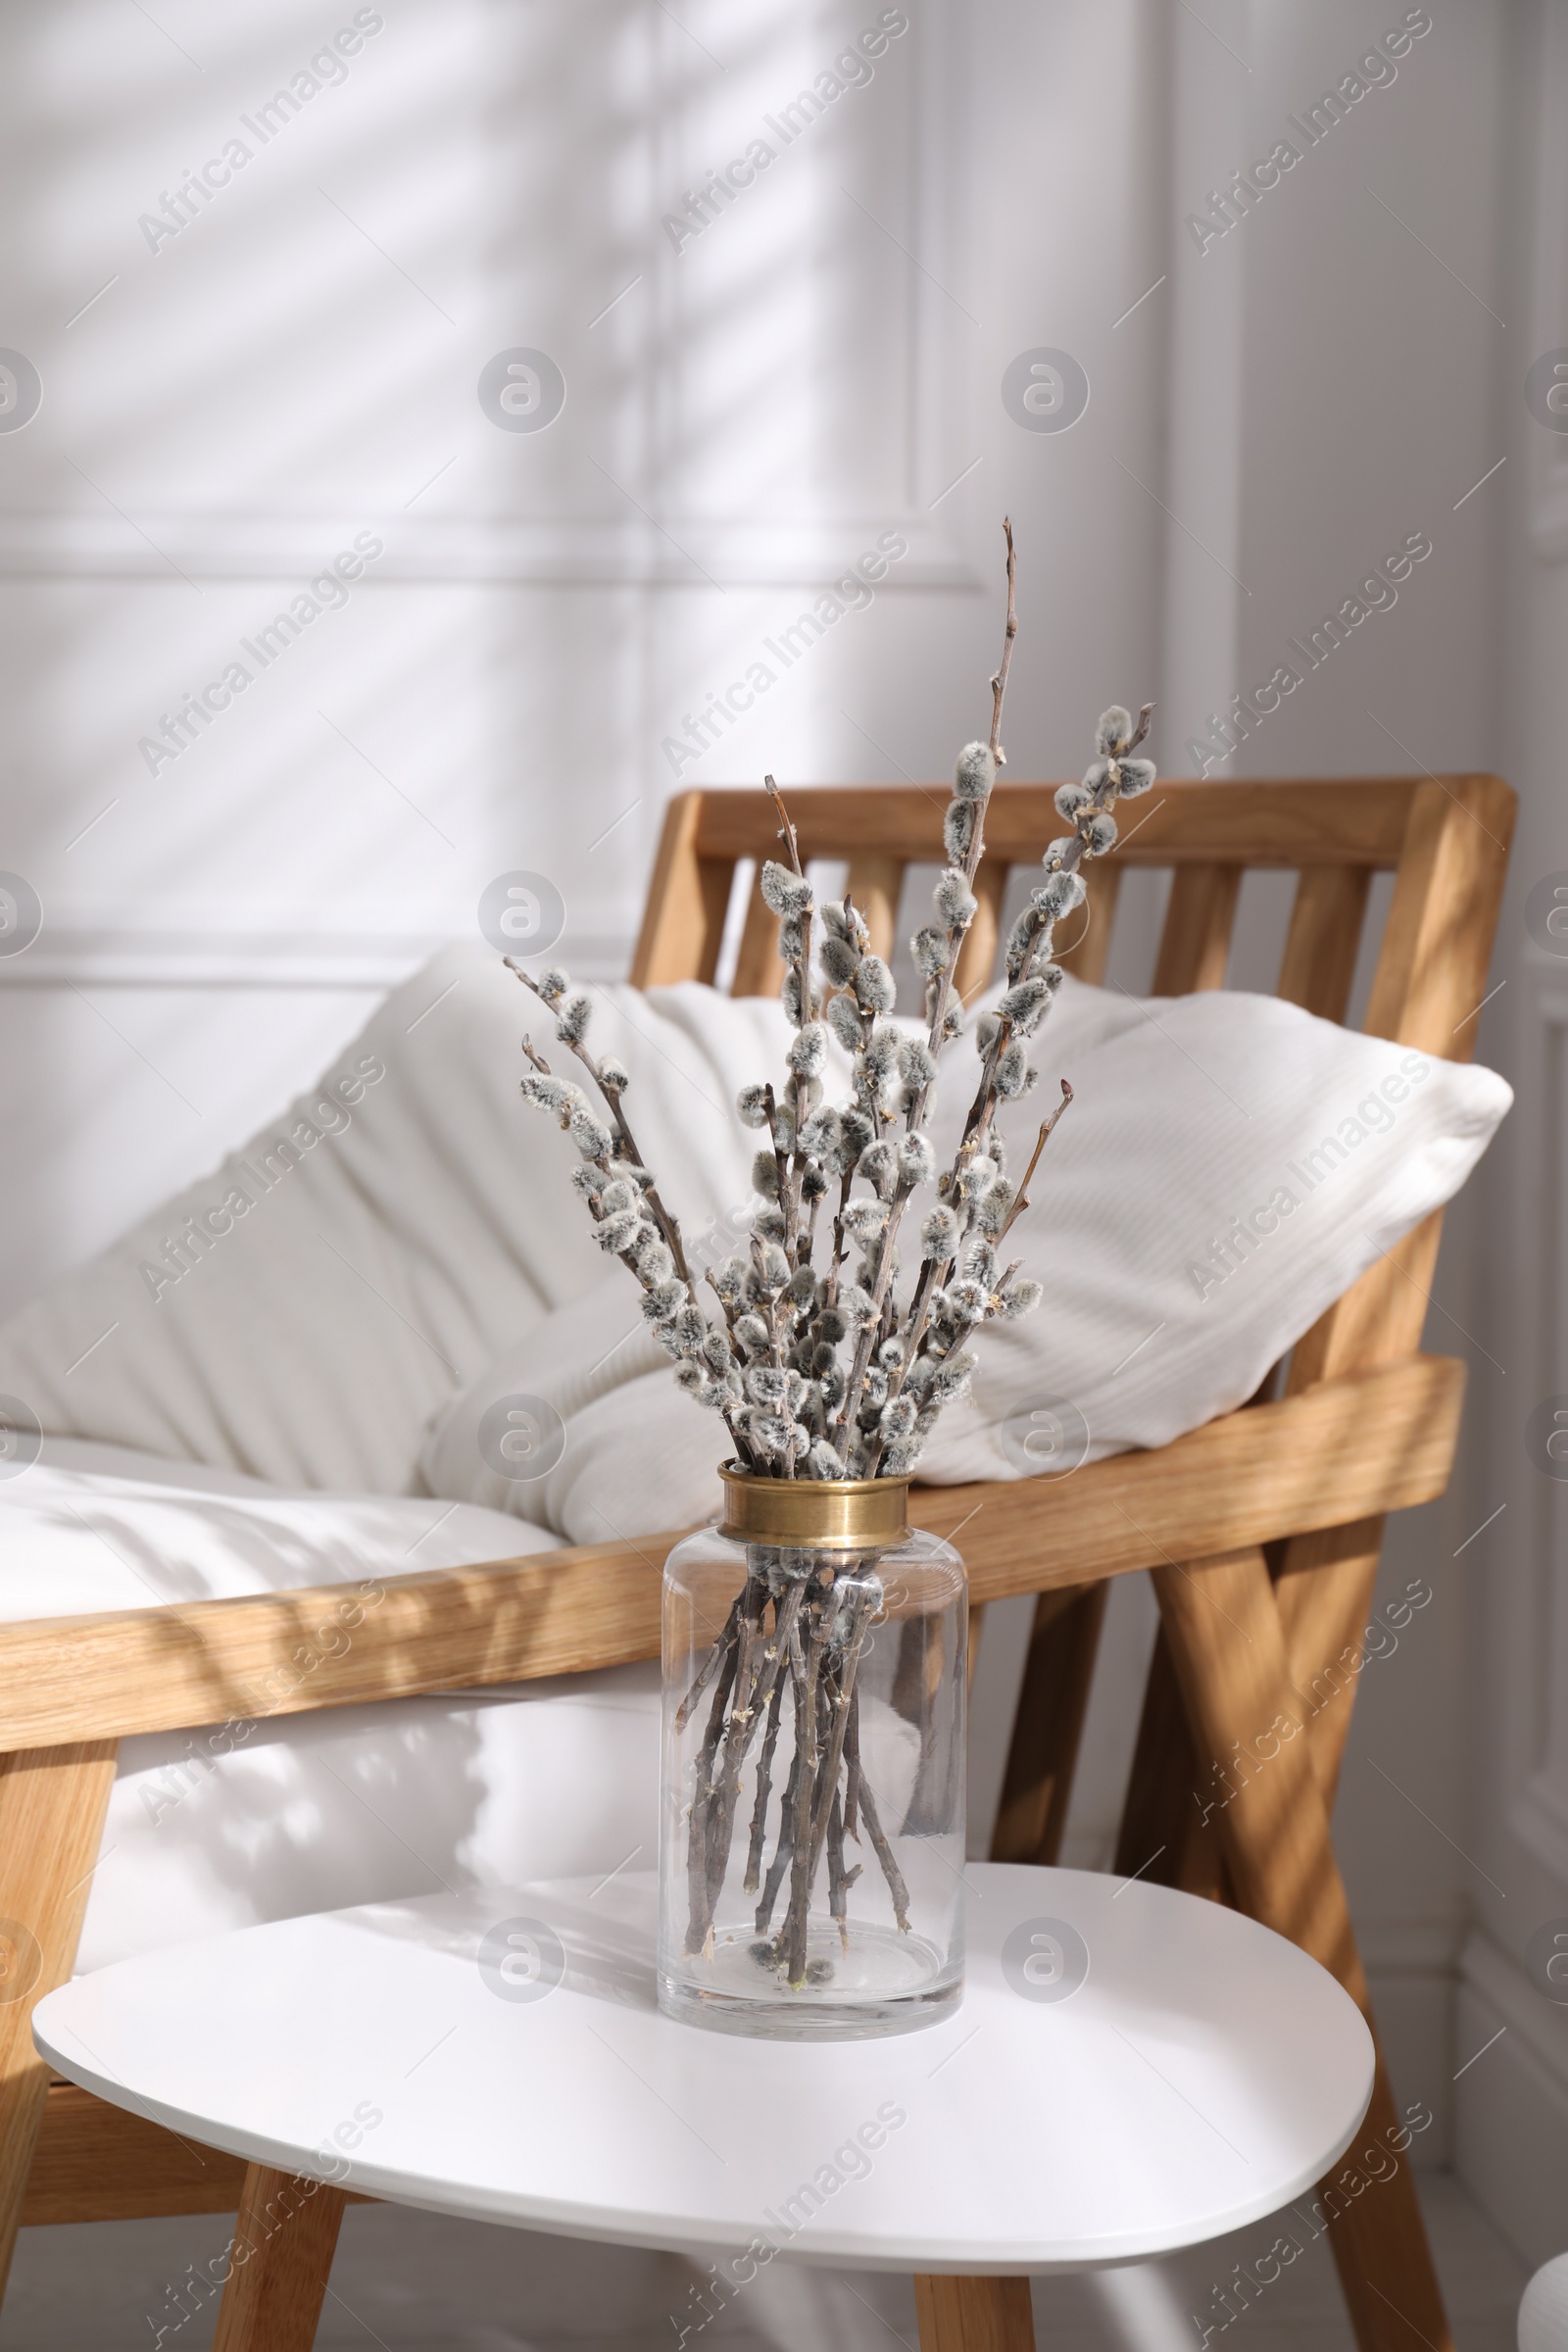 Photo of Glass vase with pussy willow tree branches on table near armchair in room